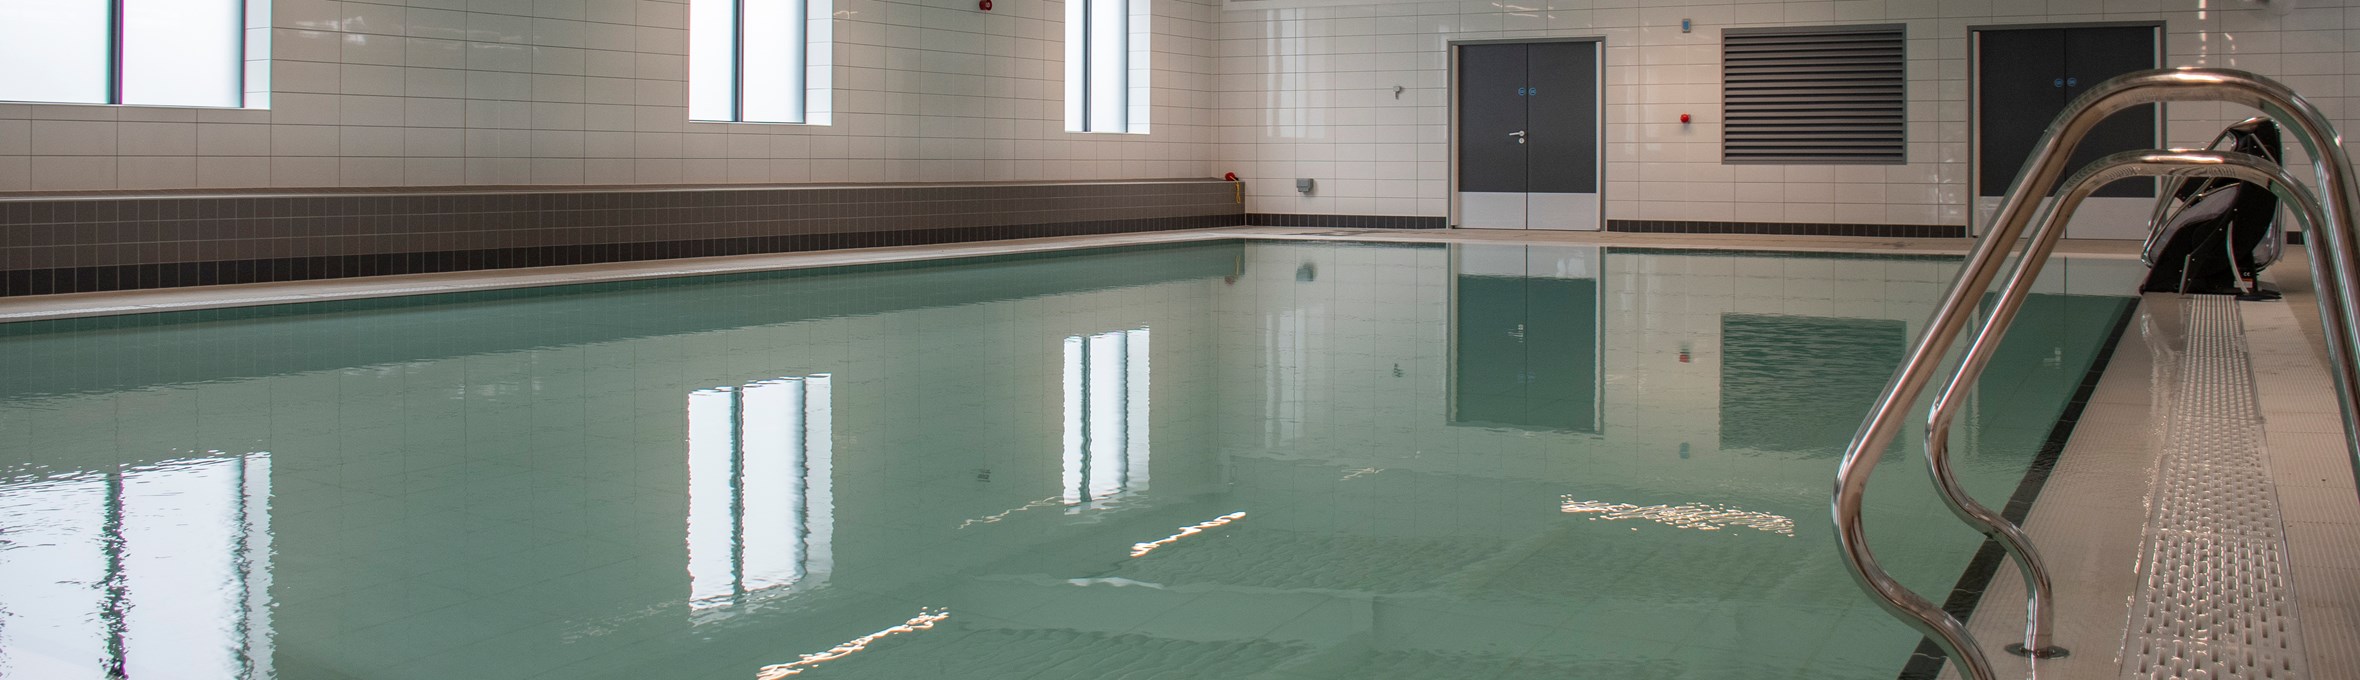 The new pool at Hucknall Leisure Centre 